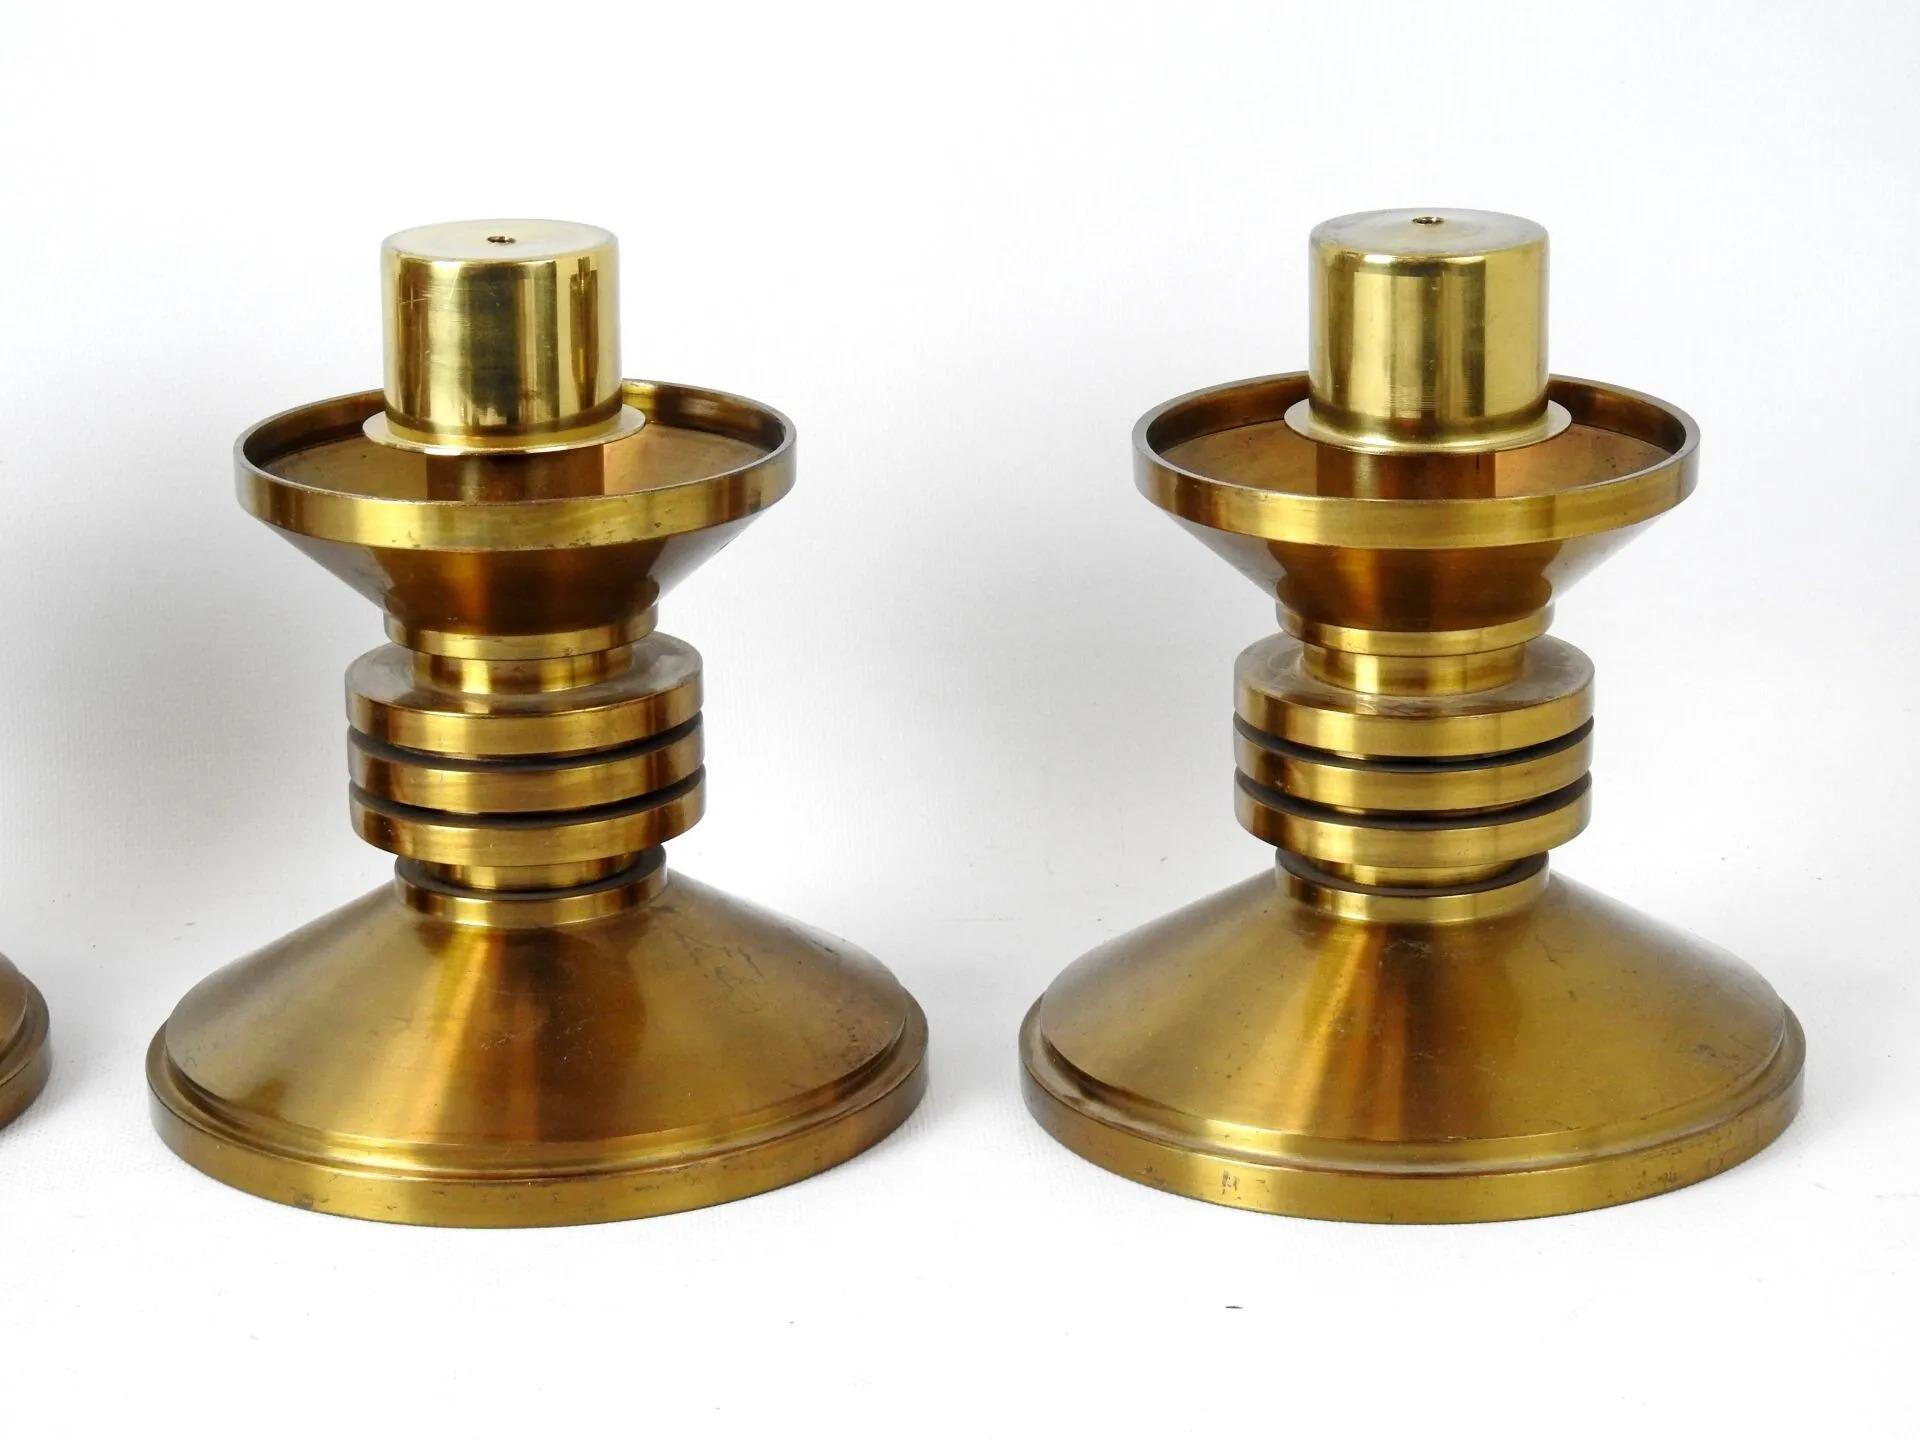 FOUR CANDLESTICKS in brass, mounted as a lamp. Work in the modernist style.
ELECTRIFICATION TO BE COMPLETED
can still be used as candle holders
the price is for 1, 4 are available